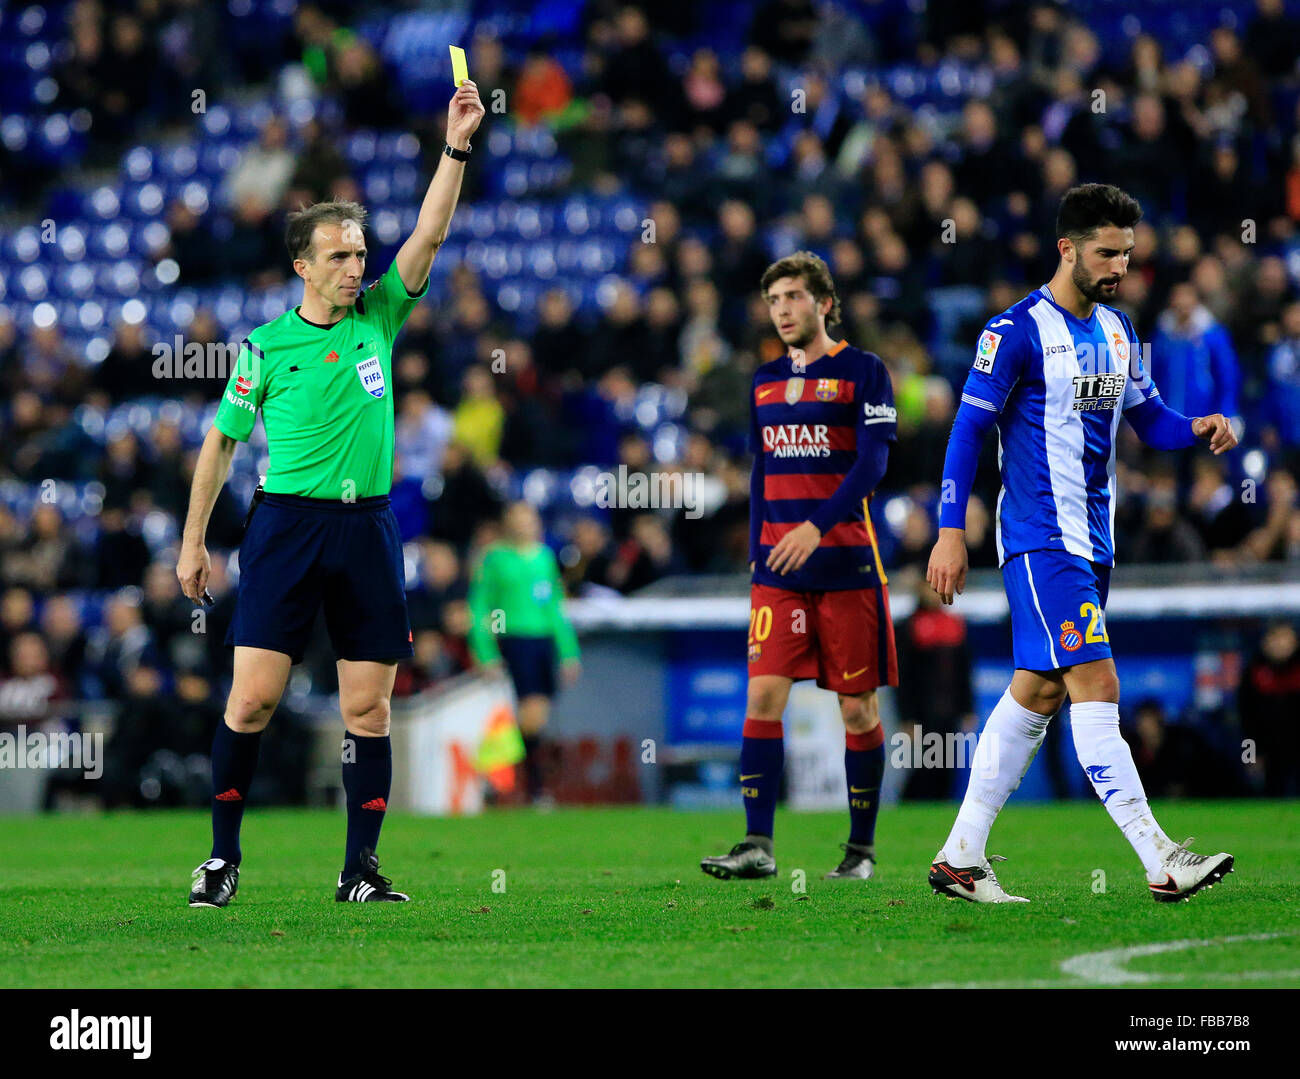 Barcelona, Spain. 13th Jan, 2016. Referee shows a yellow card to RCD Espanyol's Spanish defender Alvaro Gonzalez during the second round of Spanish King's Cup eighth final match against FC Barcelona at the Cornella-El Prat stadium in Barcelona, Spain, on Jan. 13, 2016. FC Barcelona won 2-0. © Pau Barrena/Xinhua/Alamy Live News Stock Photo